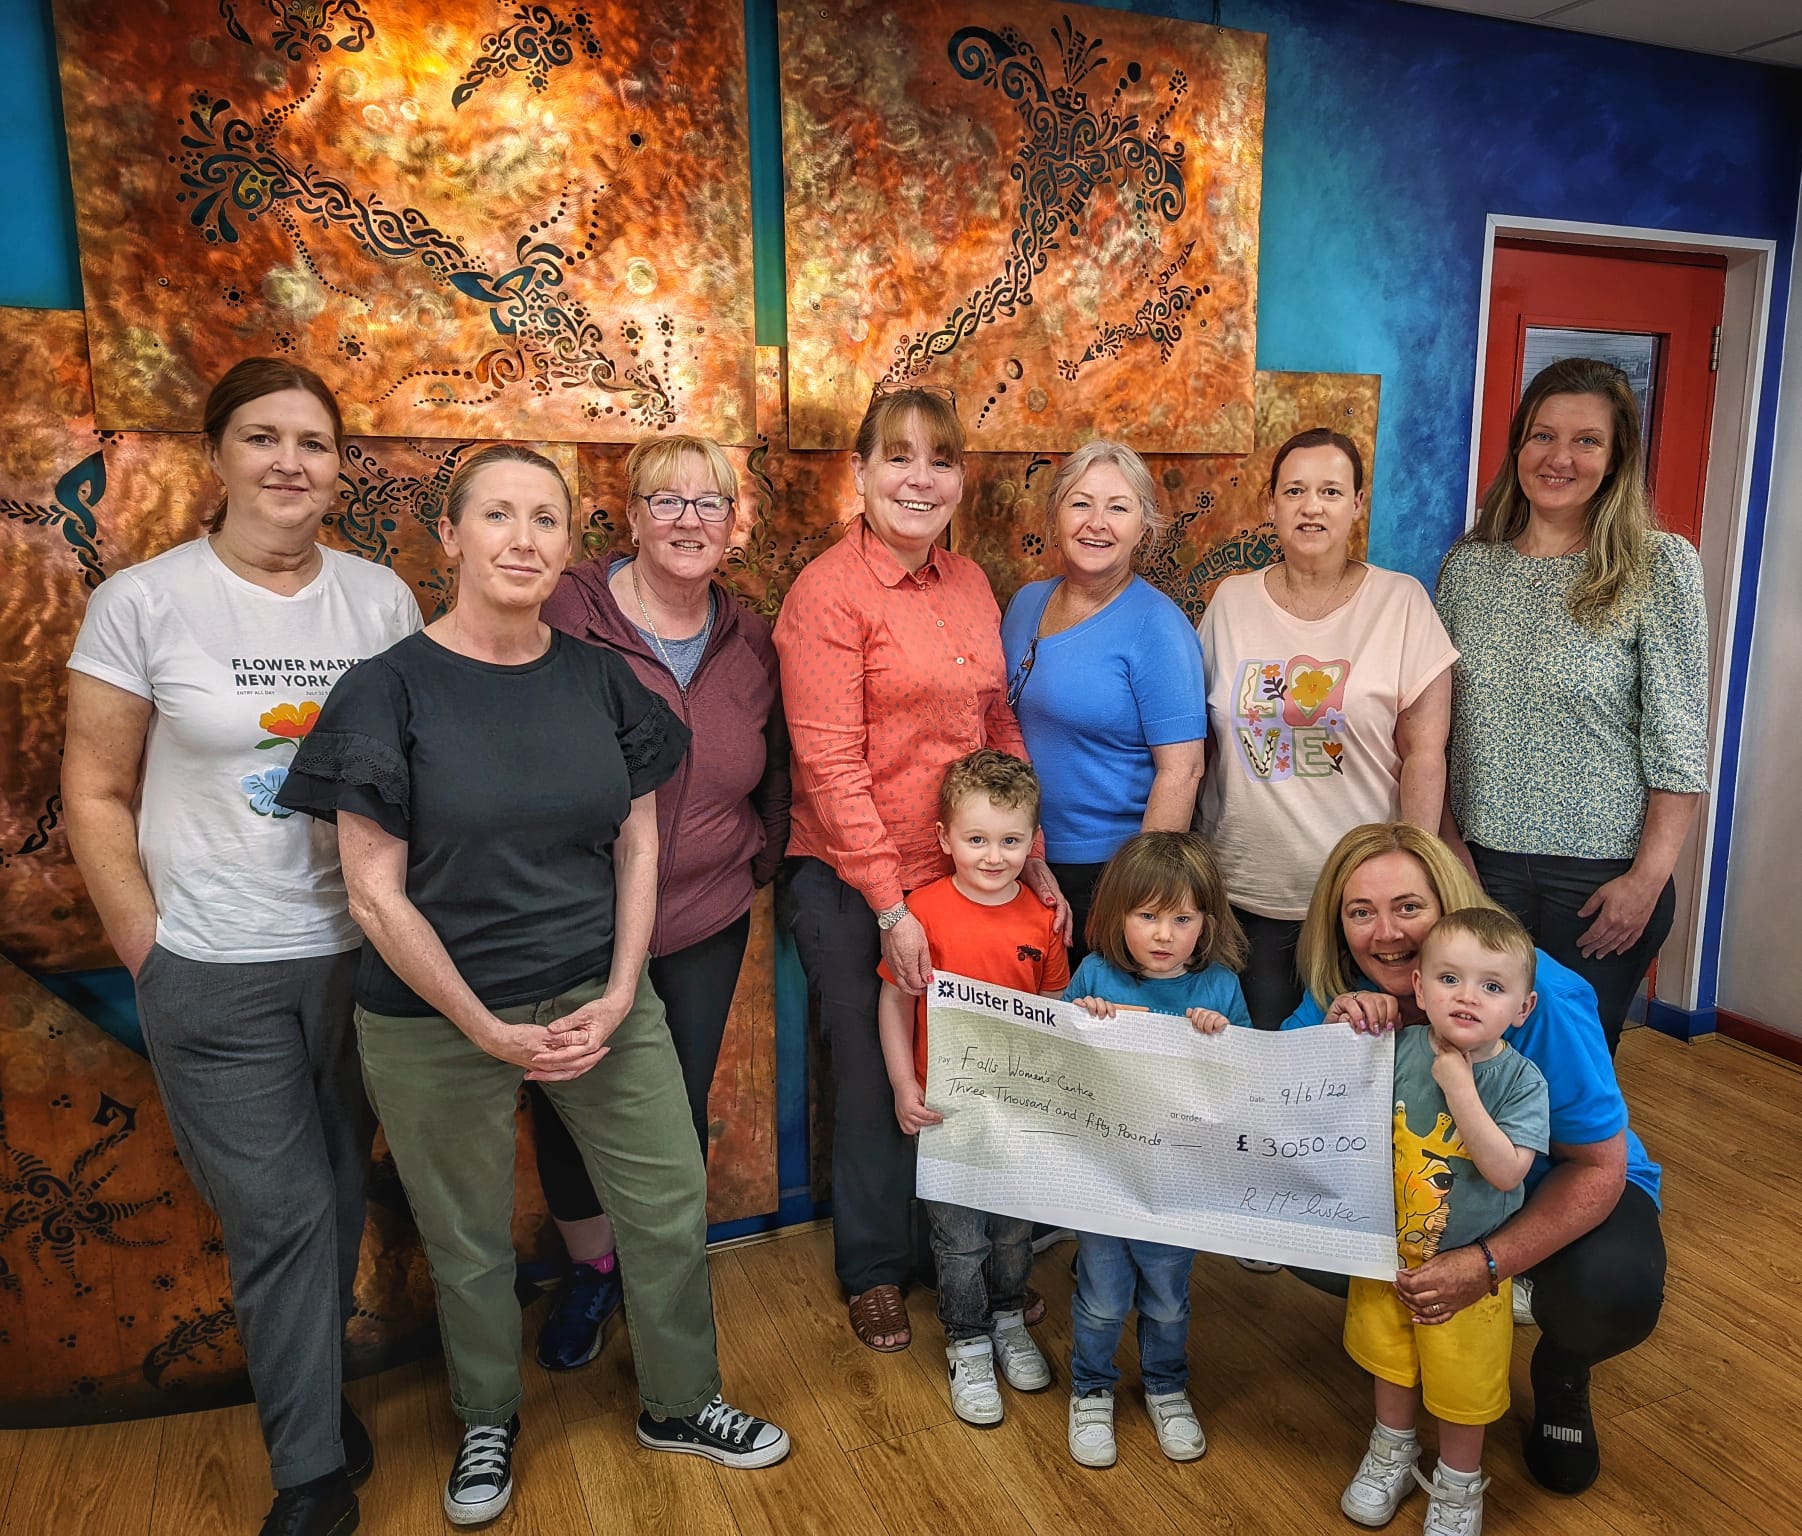 CHEQUE: Maura McCrory\'s daughter Rosie presented the cheque to the staff of Falls Women\'s Centre